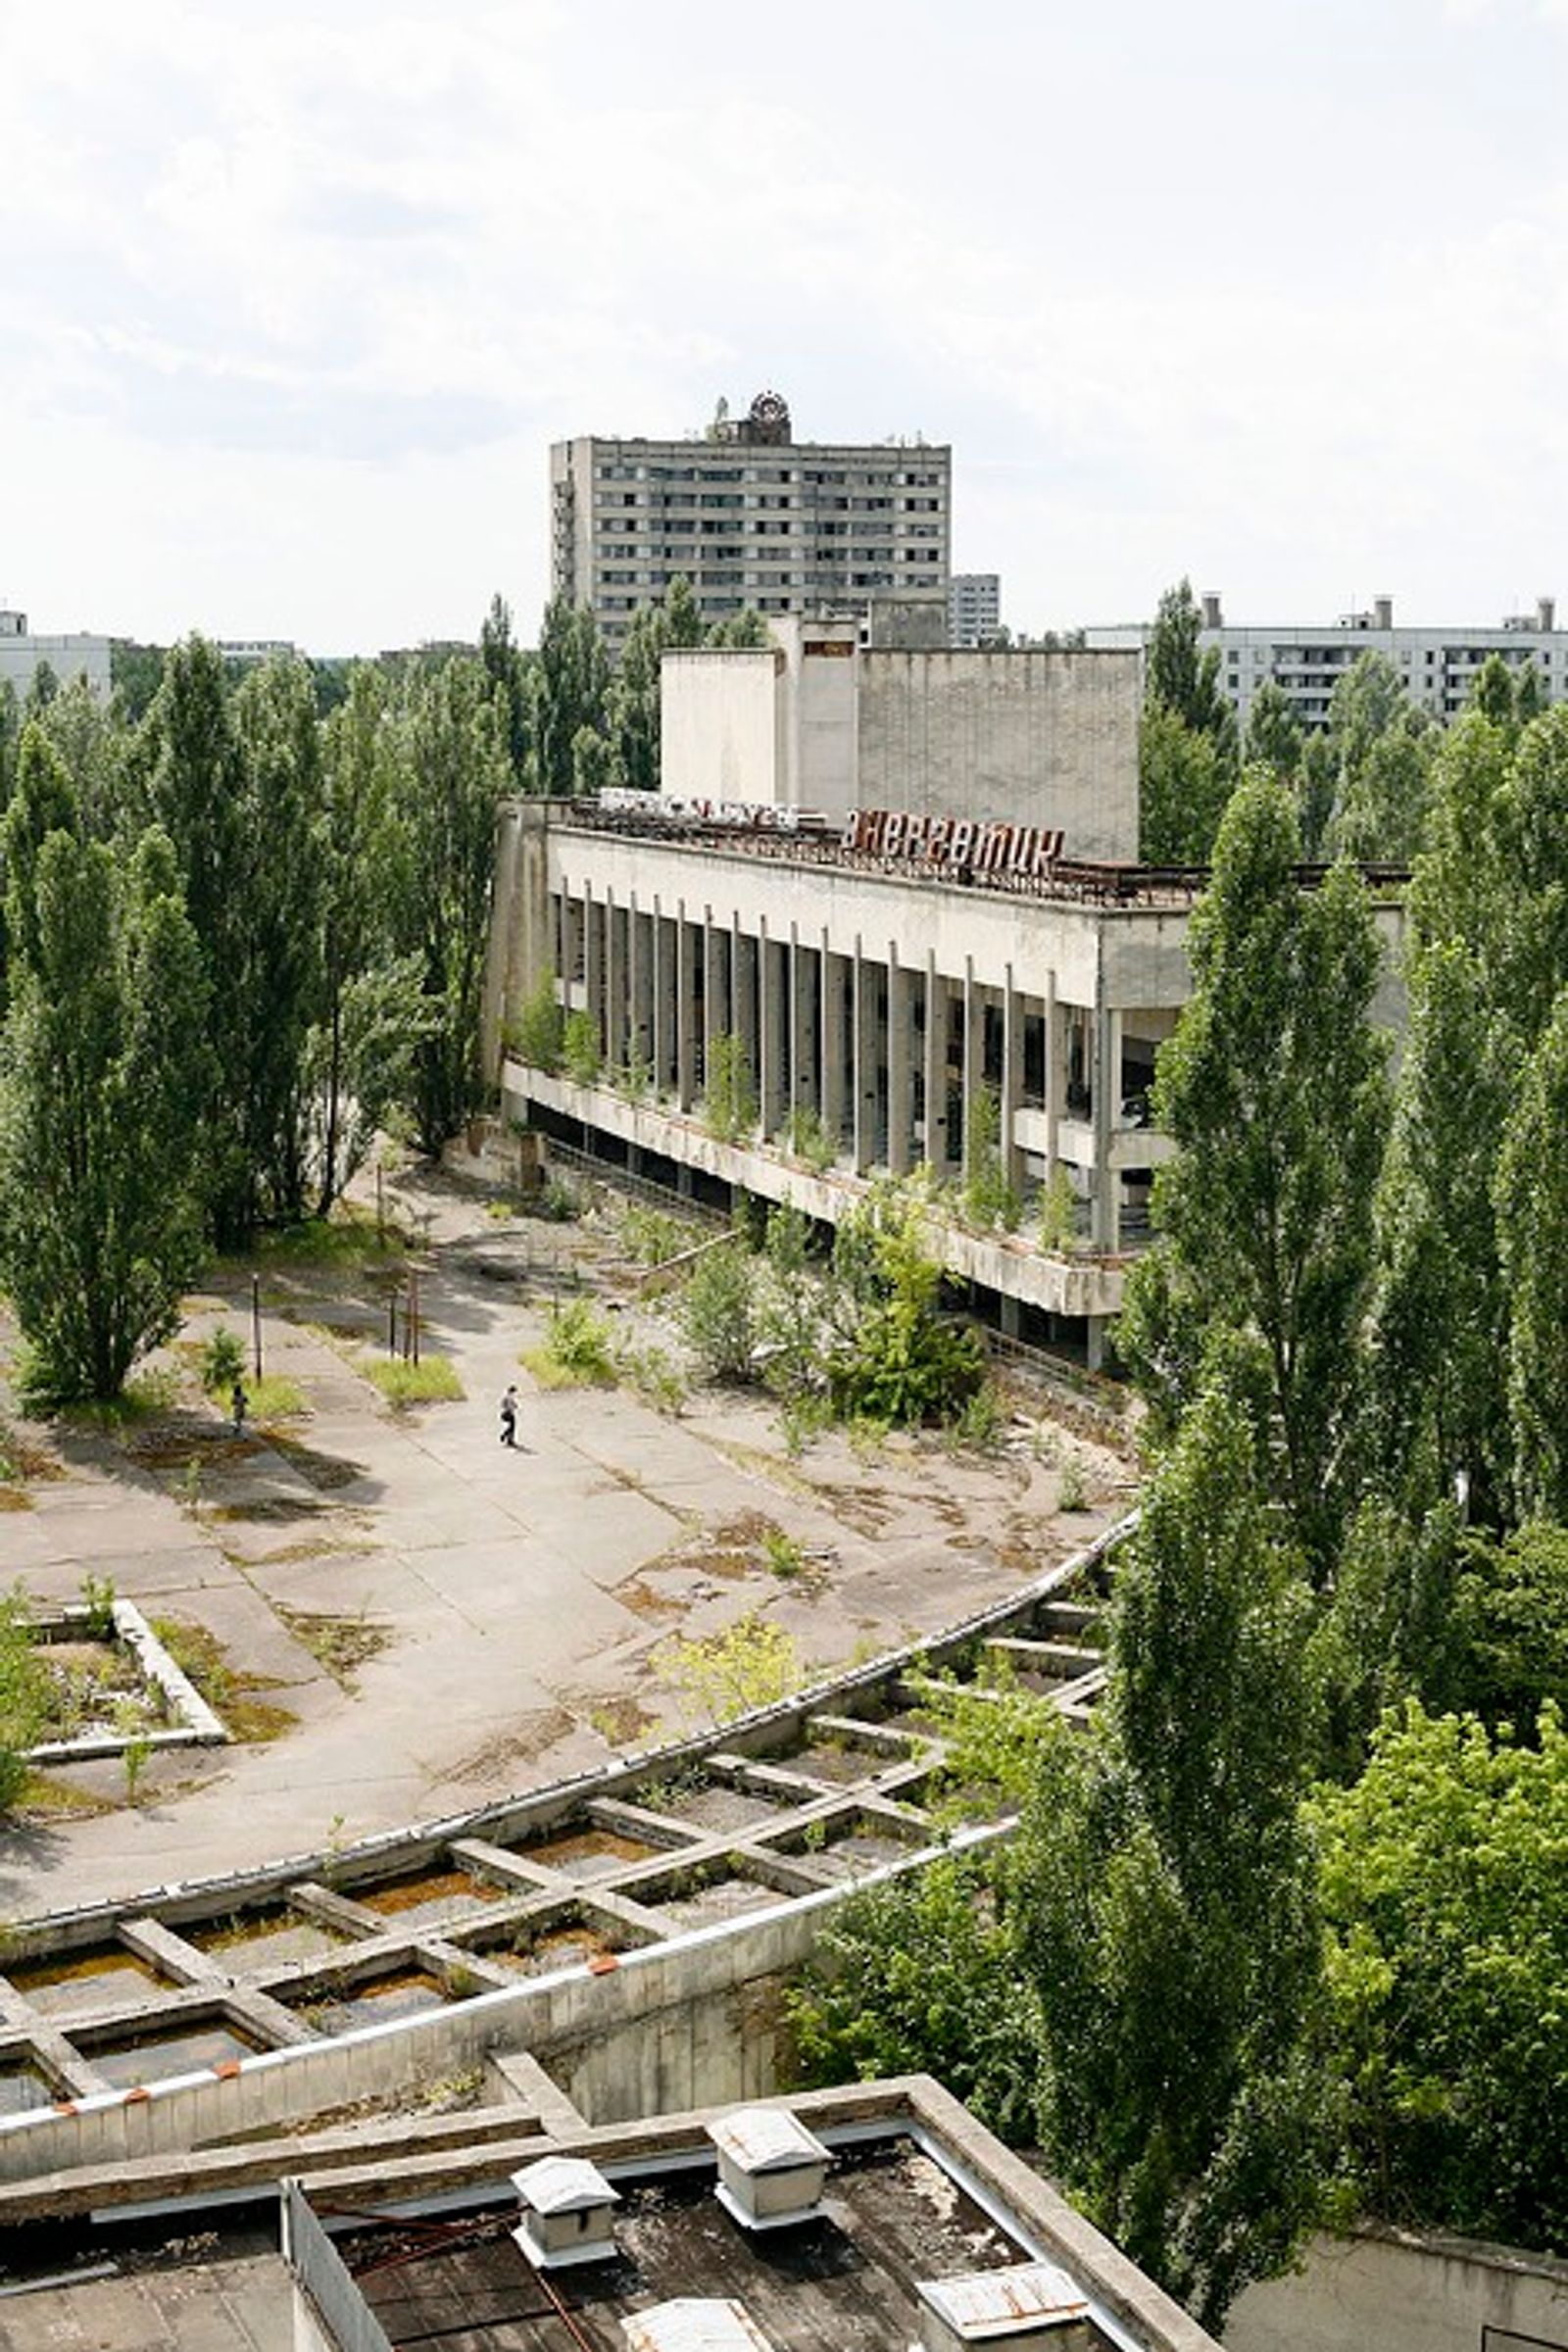 © Michael Forster Rothbart - Image from the After Chernobyl photography project